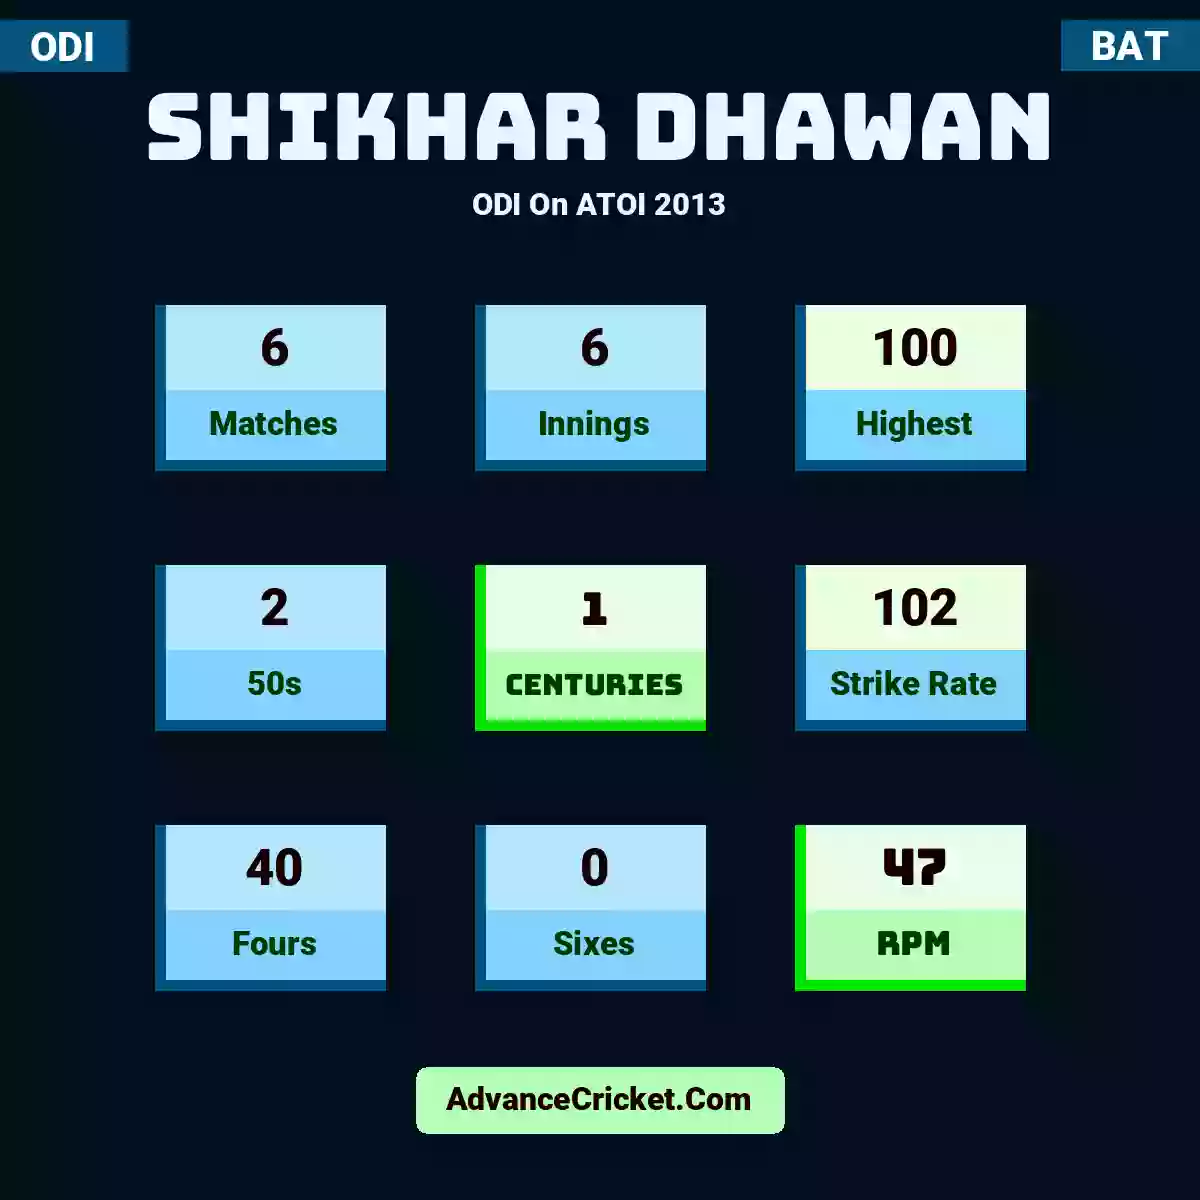 Shikhar Dhawan ODI  On ATOI 2013, Shikhar Dhawan played 6 matches, scored 100 runs as highest, 2 half-centuries, and 1 centuries, with a strike rate of 102. S.Dhawan hit 40 fours and 0 sixes, with an RPM of 47.